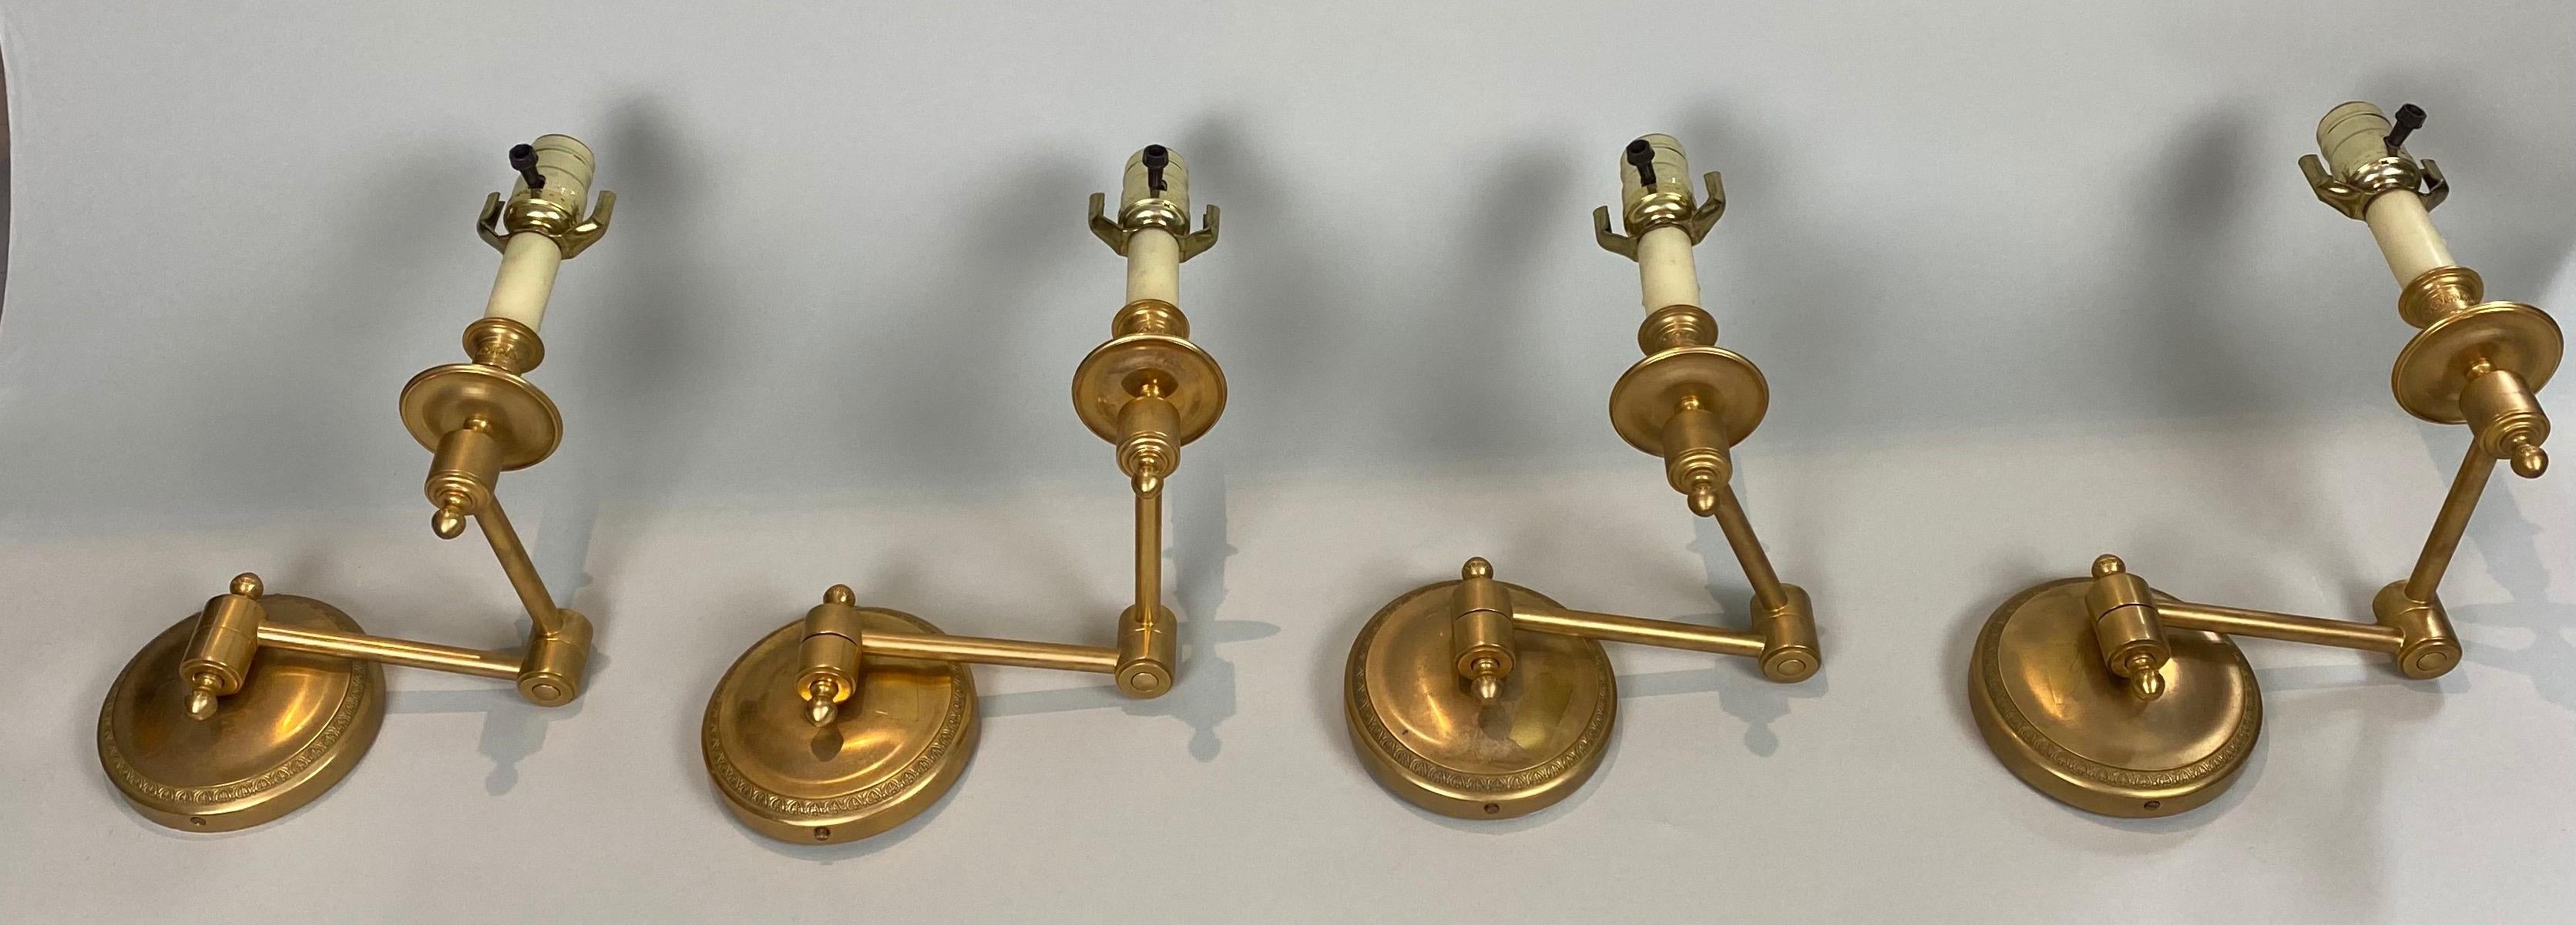 Two pairs of swing arm wall lights, made in France and attributed to Tisserant. Gold Plated Bronze Finish. Unsigned. Available as a set of 4 or by the pair. Please note, one back has slight cutout visible in photo. Diameter of backplate 5 inches.